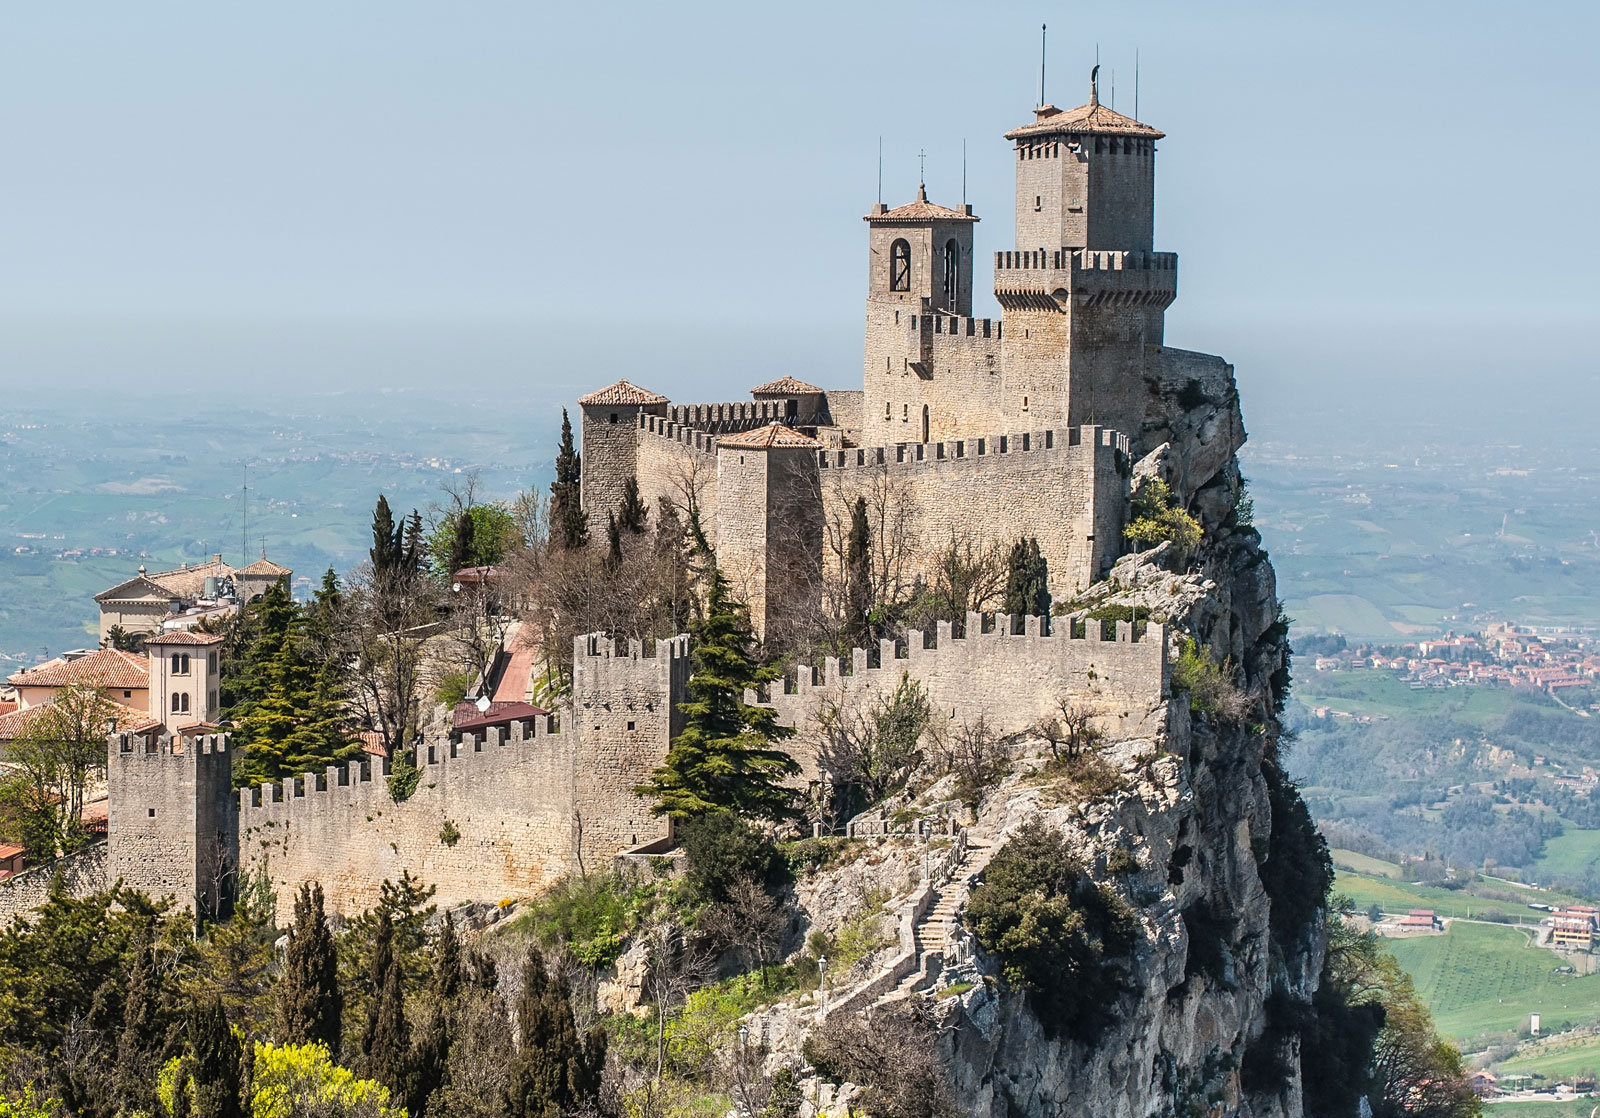 Unfortunately, Most People Will Struggle to Locate These Countries — Can You Get 17/25? Guaita Tower, San Marino